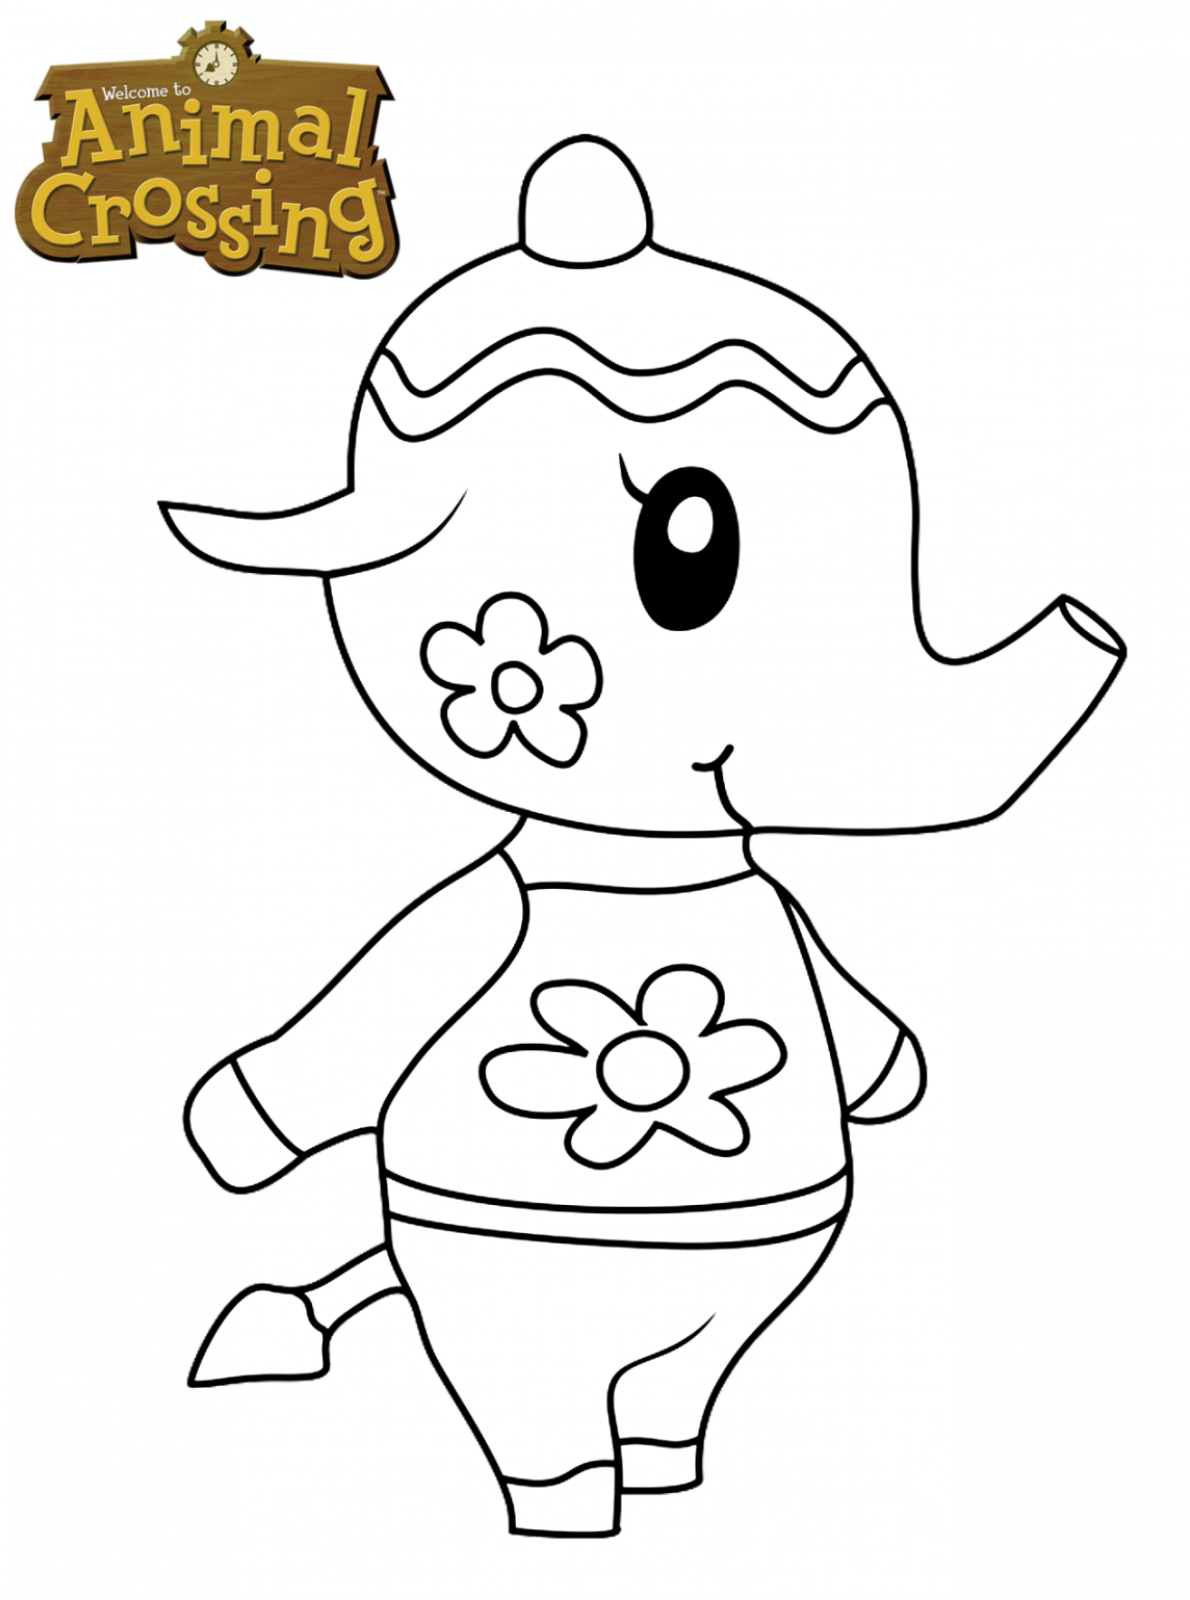 Animal Crossing Coloring Pages - tia Animal Crossing Coloring Pages